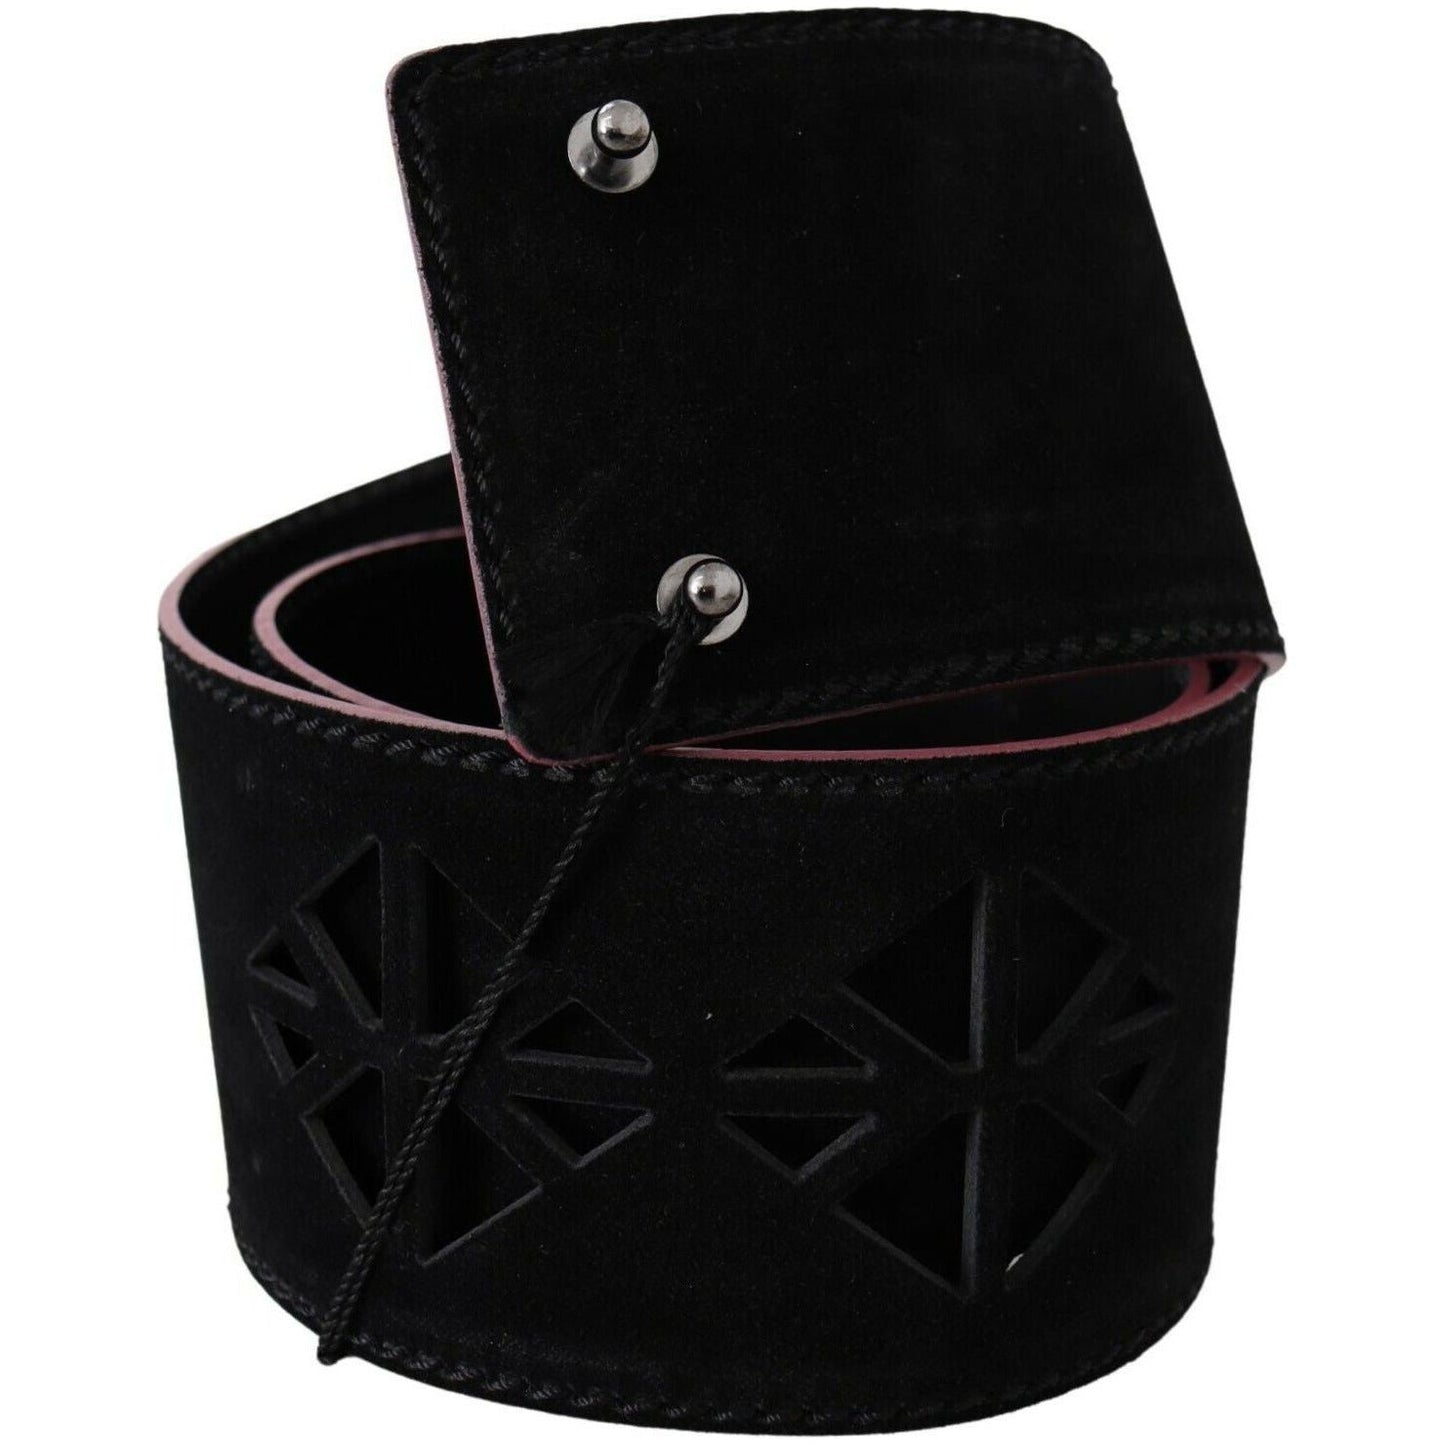 Costume National Elegant Wide Leather Fashion Belt with Metal Accents black-leather-wide-waist-studded-women-belt s-l1600-2022-08-19T124439.298-ba940c14-a5c.jpg